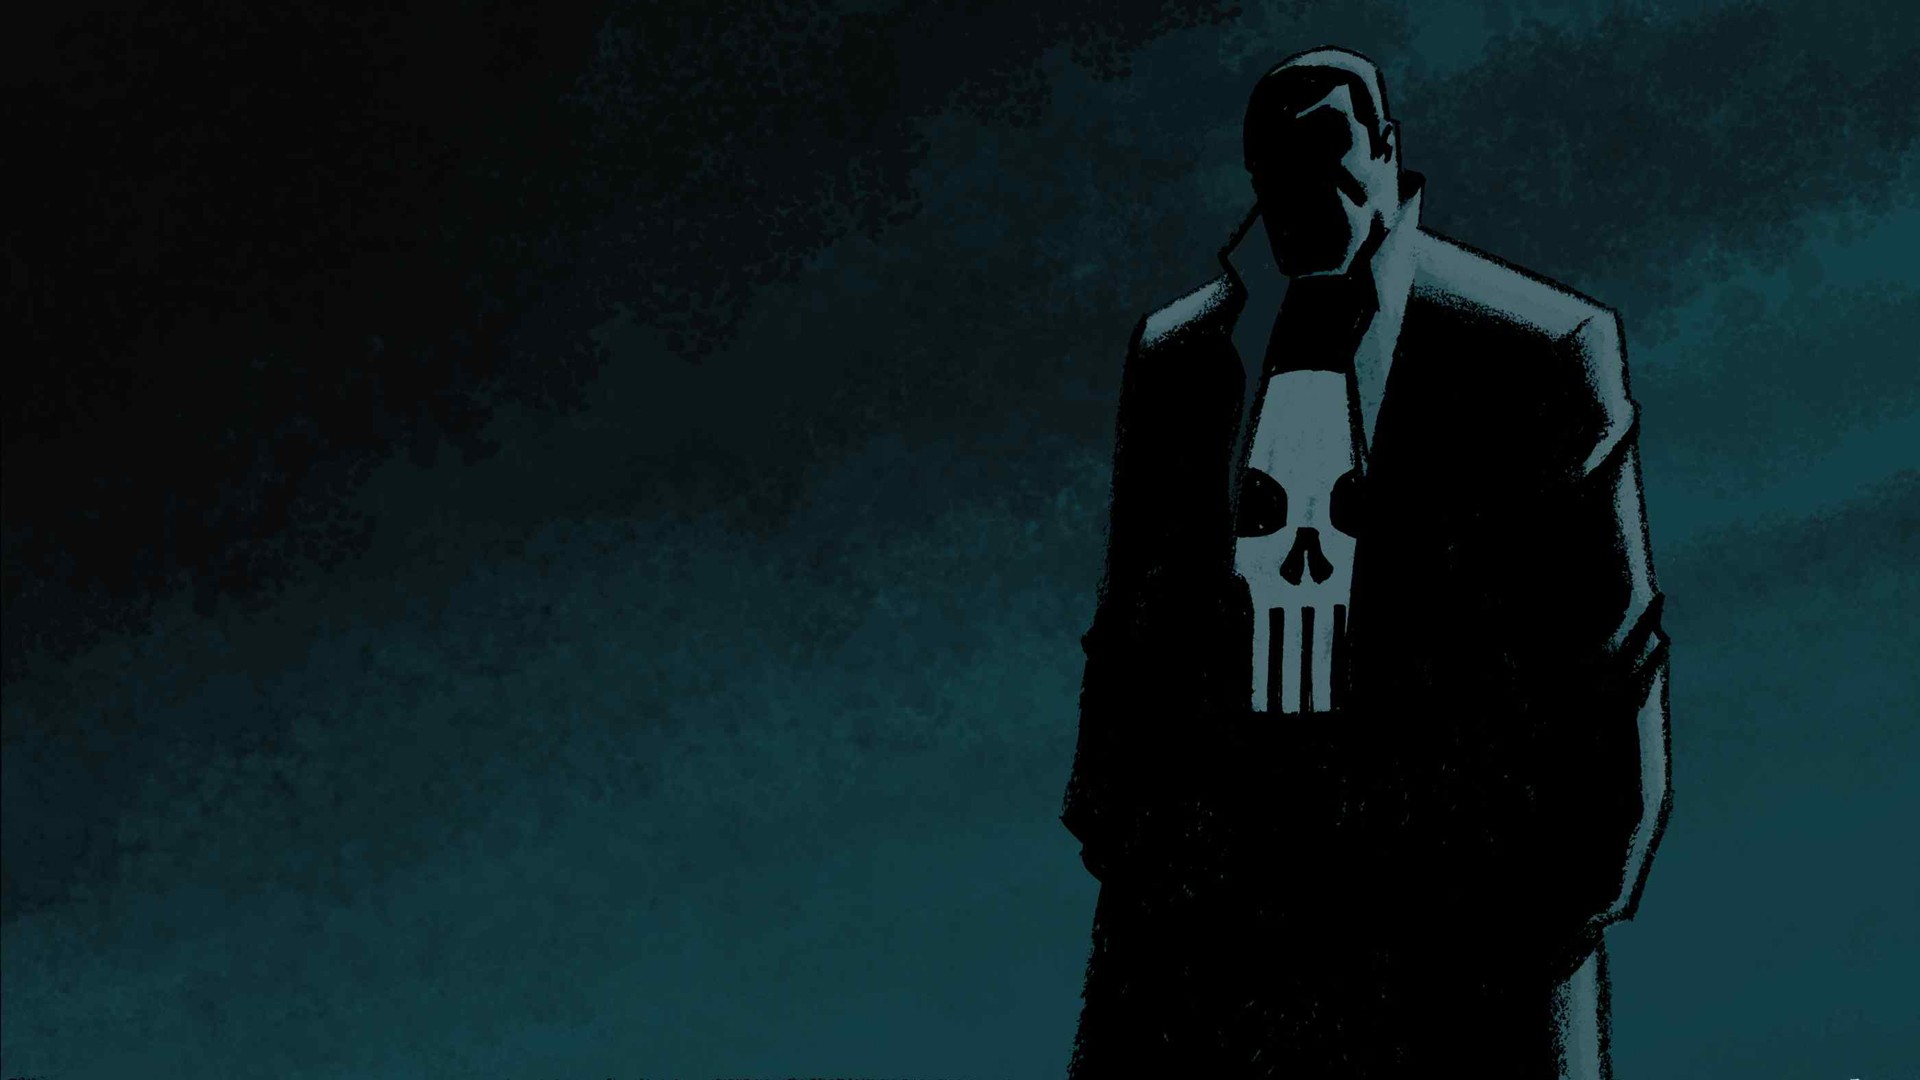  the punisher wallpaper hot hd and full view the punisher wallpaper